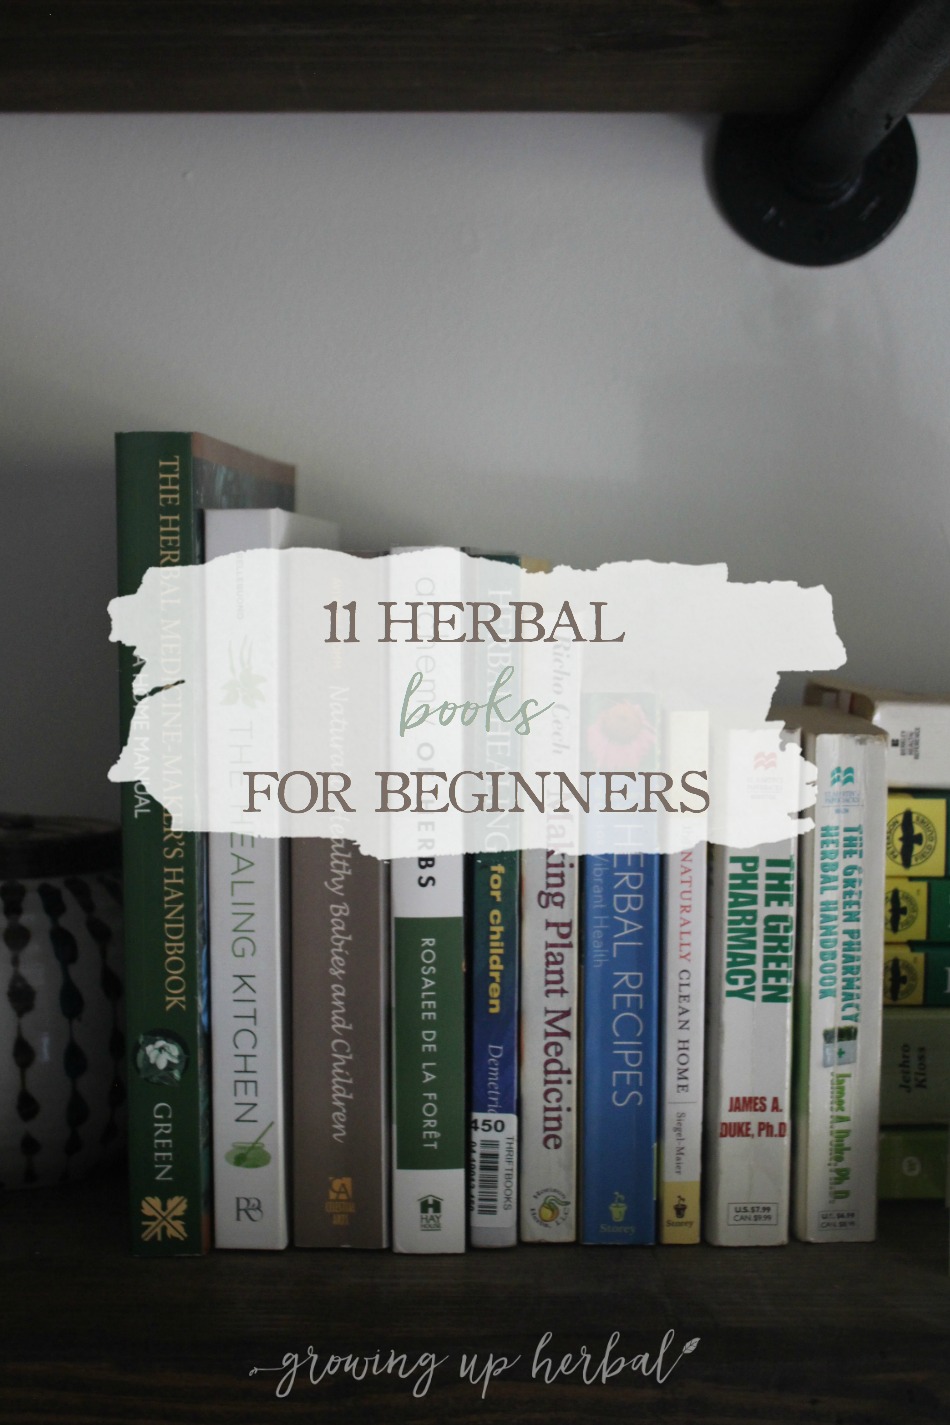 11 Herbal Books For Beginners | Growing Up Herbal | Are you a beginner herbalist or new to natural living? If so, here are 11 herbal books that may be just what you're looking for at the moment!